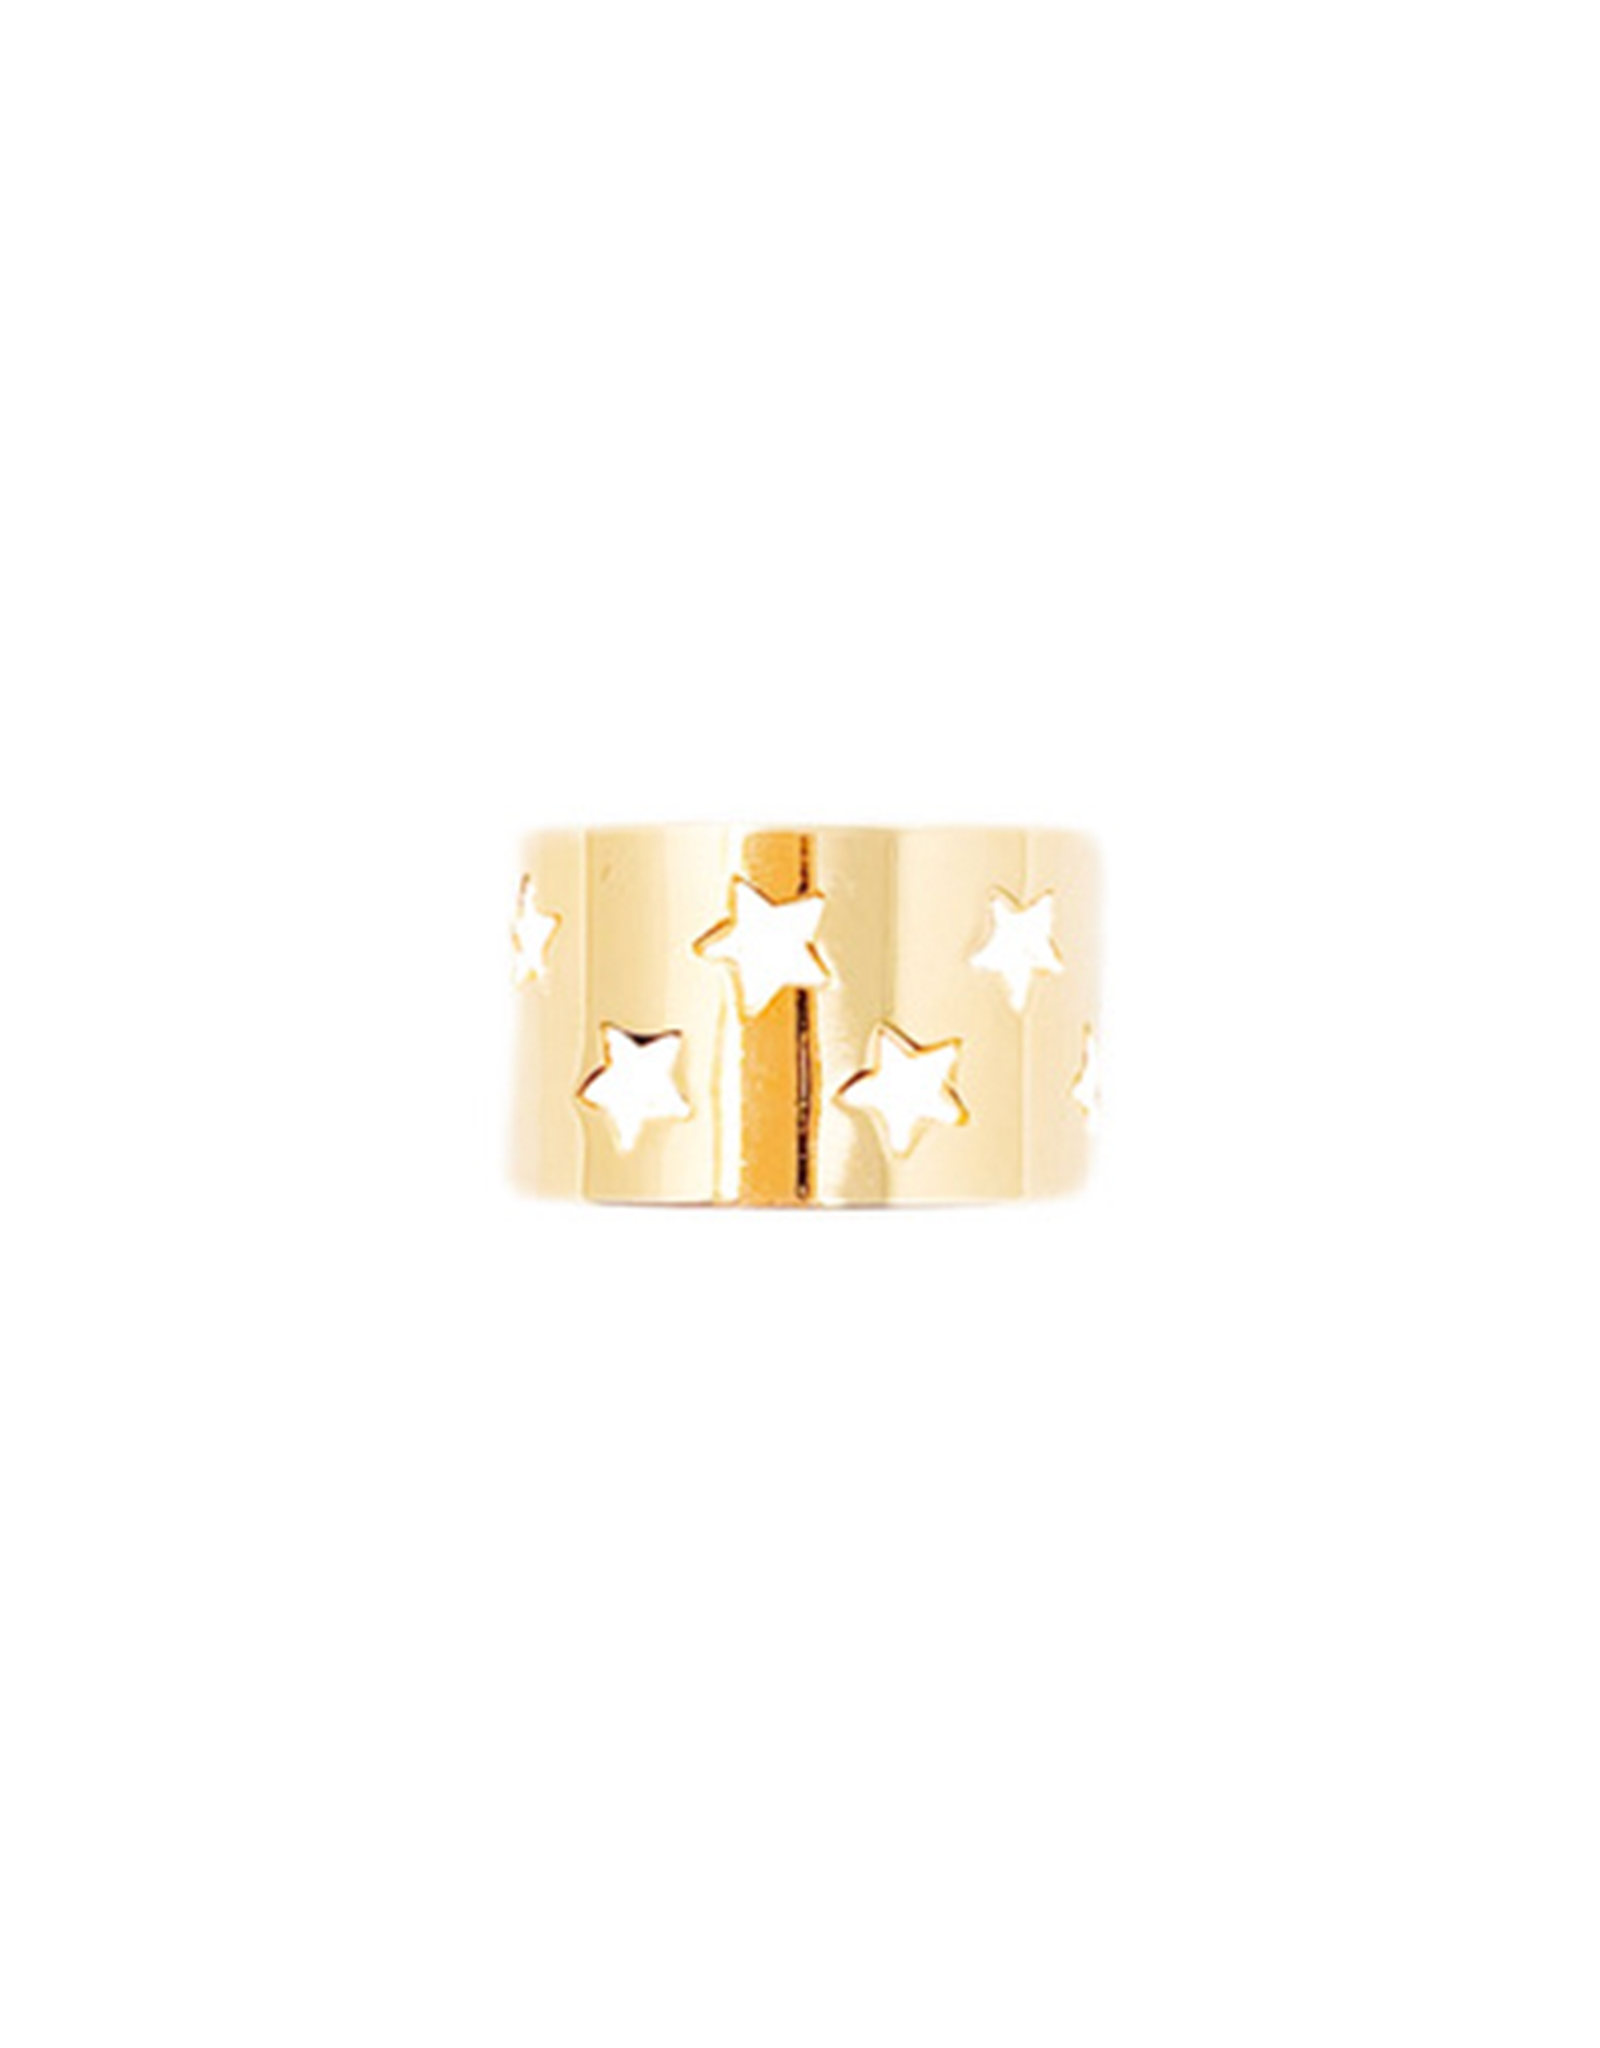 Wrapped by Sav star cutout ring